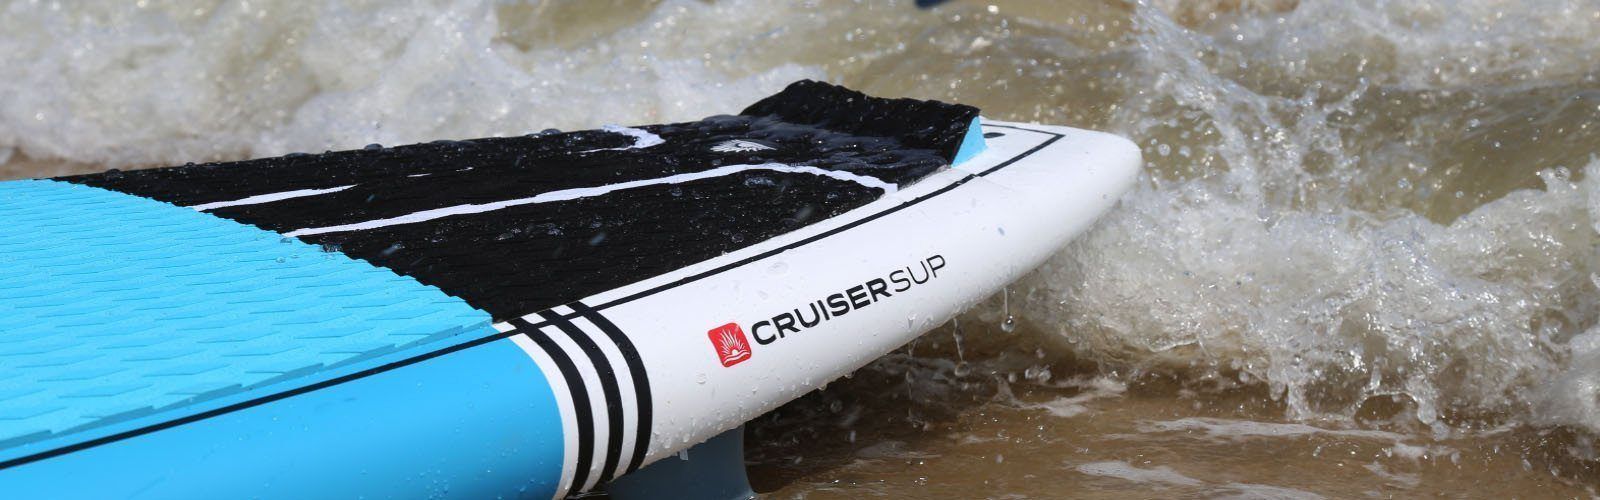 Stand Up Paddle Board Accessories & Paddles | Cruiser SUP® Canada